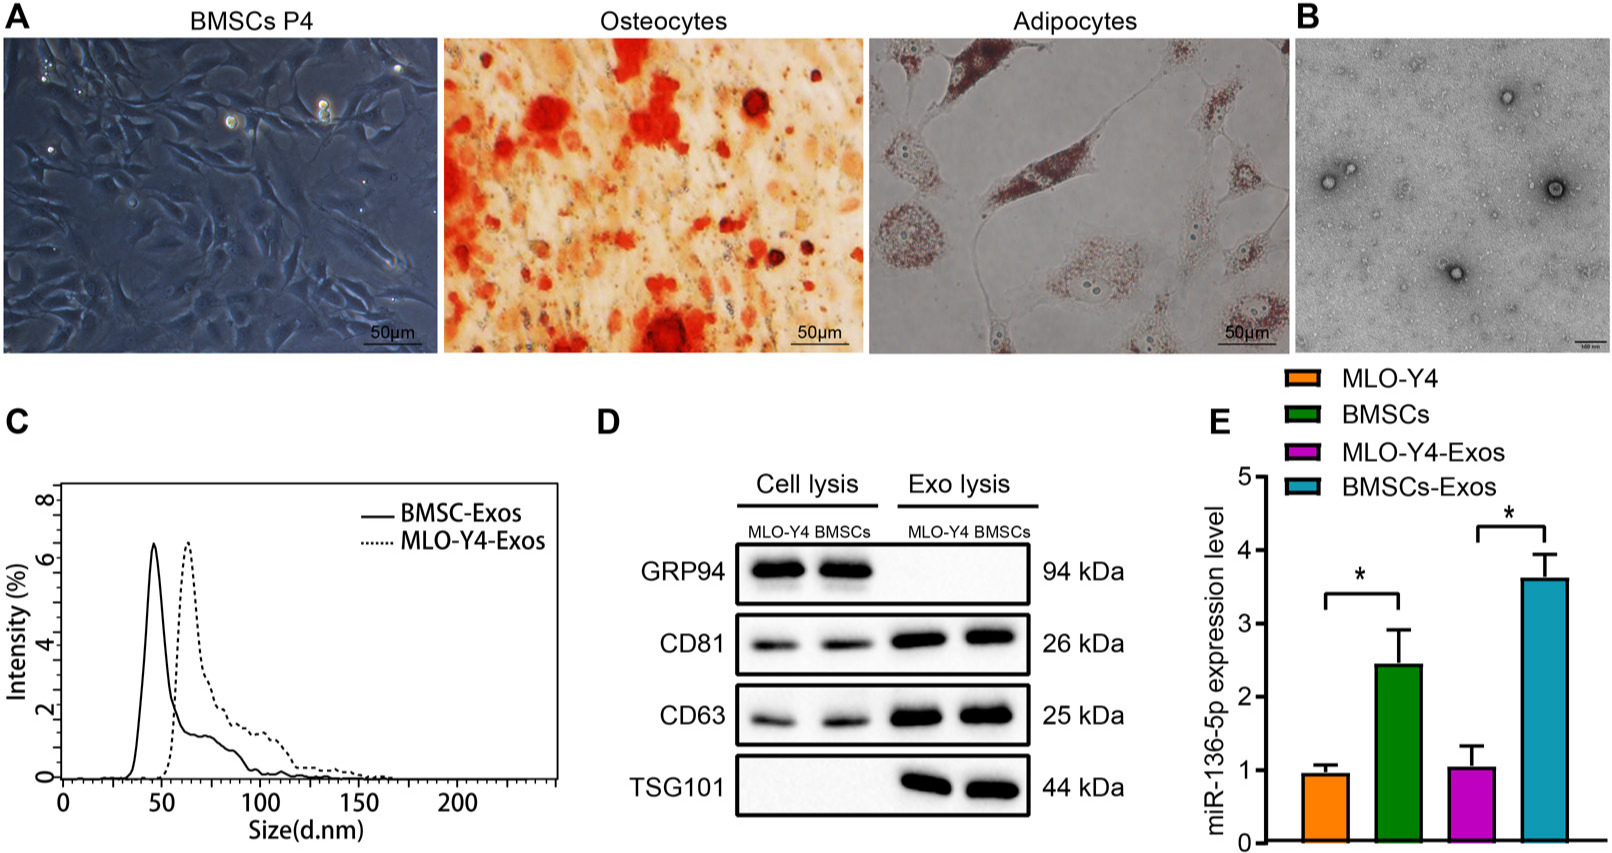 Fig. 2 
            miR-136-5p is highly expressed in bone marrow mesenchymal stem cells (BMSCs) and their exosomes. a) Morphological characteristics of BMSCs at passage 4 and alizarin red S and oil red O staining results of osteogenic as well as adipogenic differentiation observed under an optical microscope (× 200); b) exosome structure diagram observed under a transmission electron microscope after stained by phosphotungstic acid solution (scale bar = 100 nm); c) nanosight particle tracking analysis of the size and number of exosomes; d) Western blot detection of the protein expression of TSG101, CD63, CD81, and GRP94 in MLO-Y4, BMSCs, and their exosomes; e) reverse transcription quantitative polymerase chain reaction (RT-qPCR) detection of the expression of miR-136-5p in MLO-Y4, BMSCs and exosomes; * indicates p < 0.05. Measurement data were presented as mean and standard deviation. Unpaired t-test was used for data comparison between two groups. Data comparisons among multiple groups were performed using one-way analysis of variance (ANOVA) with Tukey’s post hoc test. Data comparison among groups at different timepoints was performed by repeated measures ANOVA with Bonferroni’s post hoc test. The experiment was repeated three times.
          